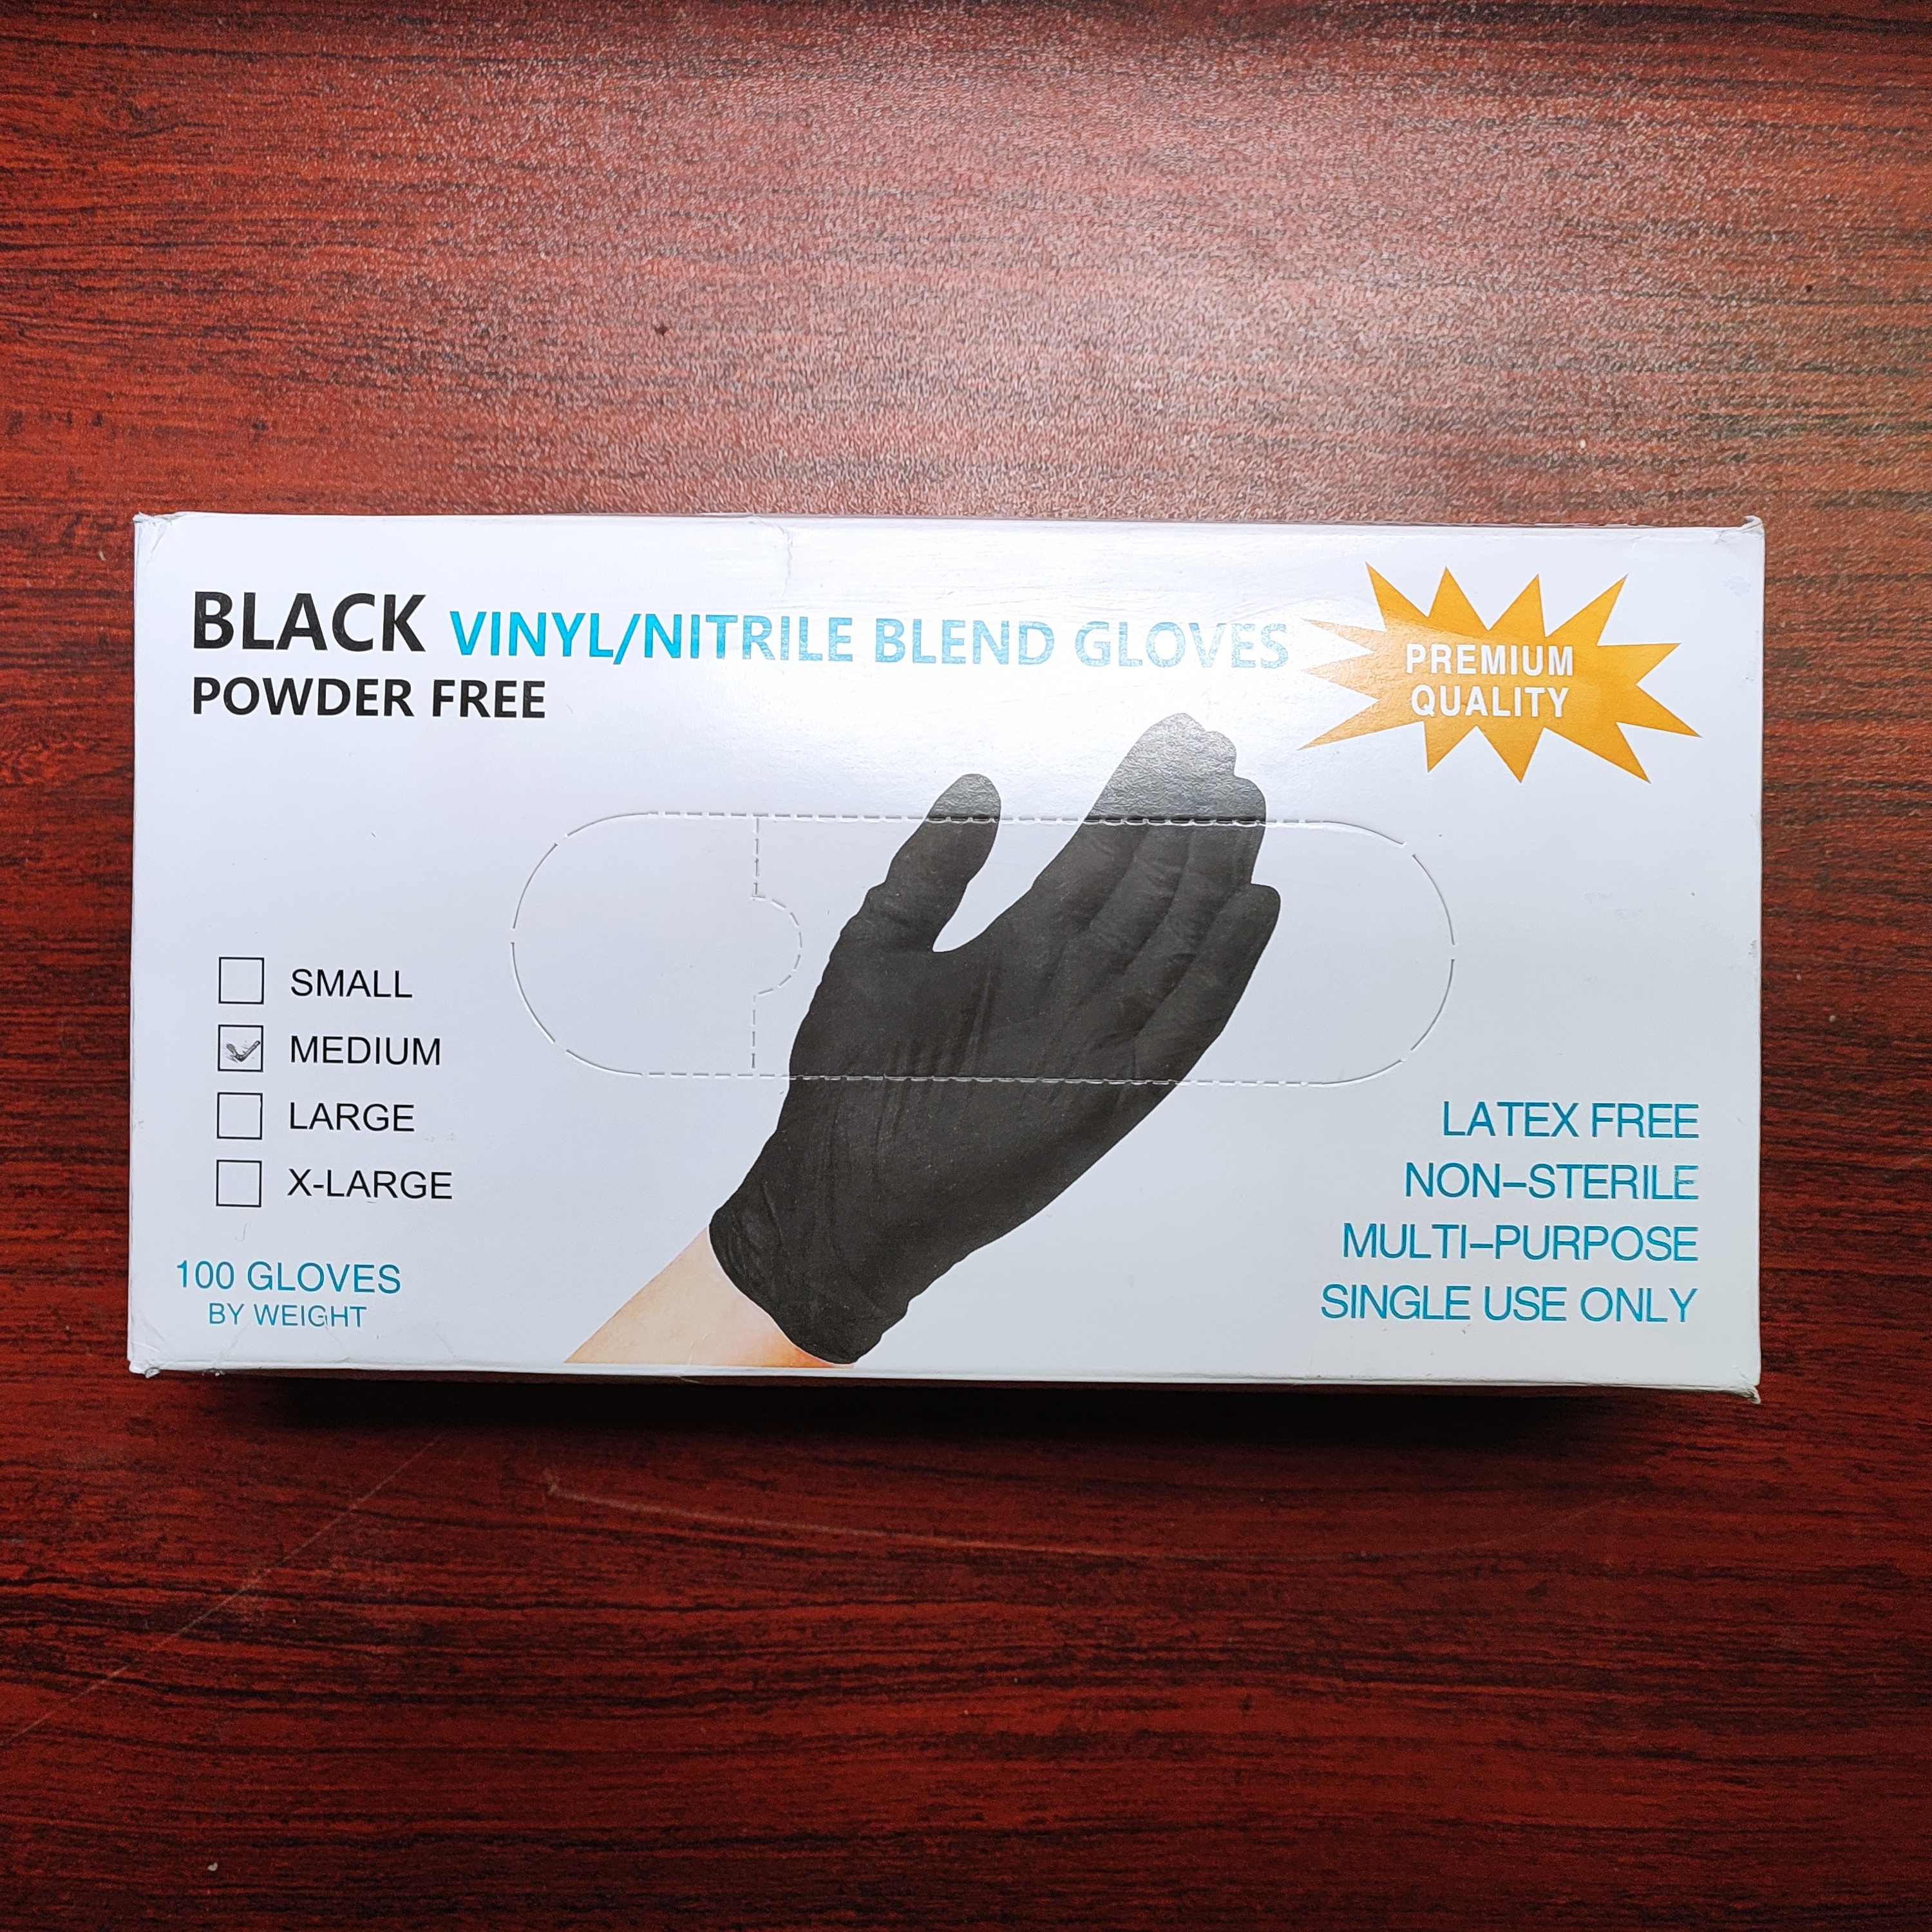 wally non-medical black vinly/nitrile blend glove factory Manufacturer contract low price